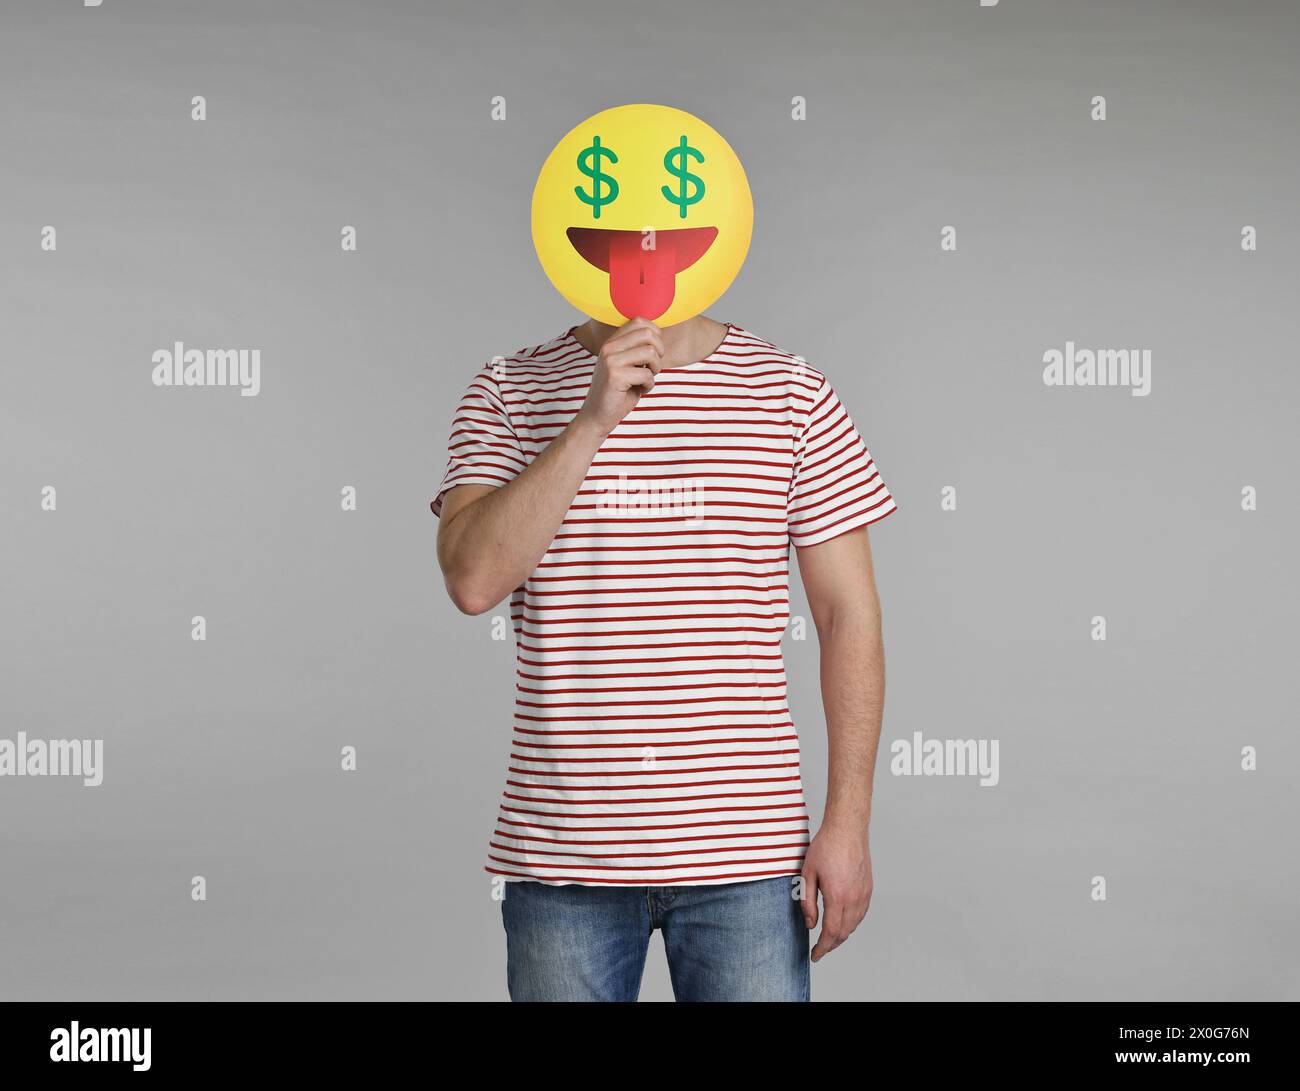 Man holding emoticon with dollar signs instead of eyes on grey background Stock Photo